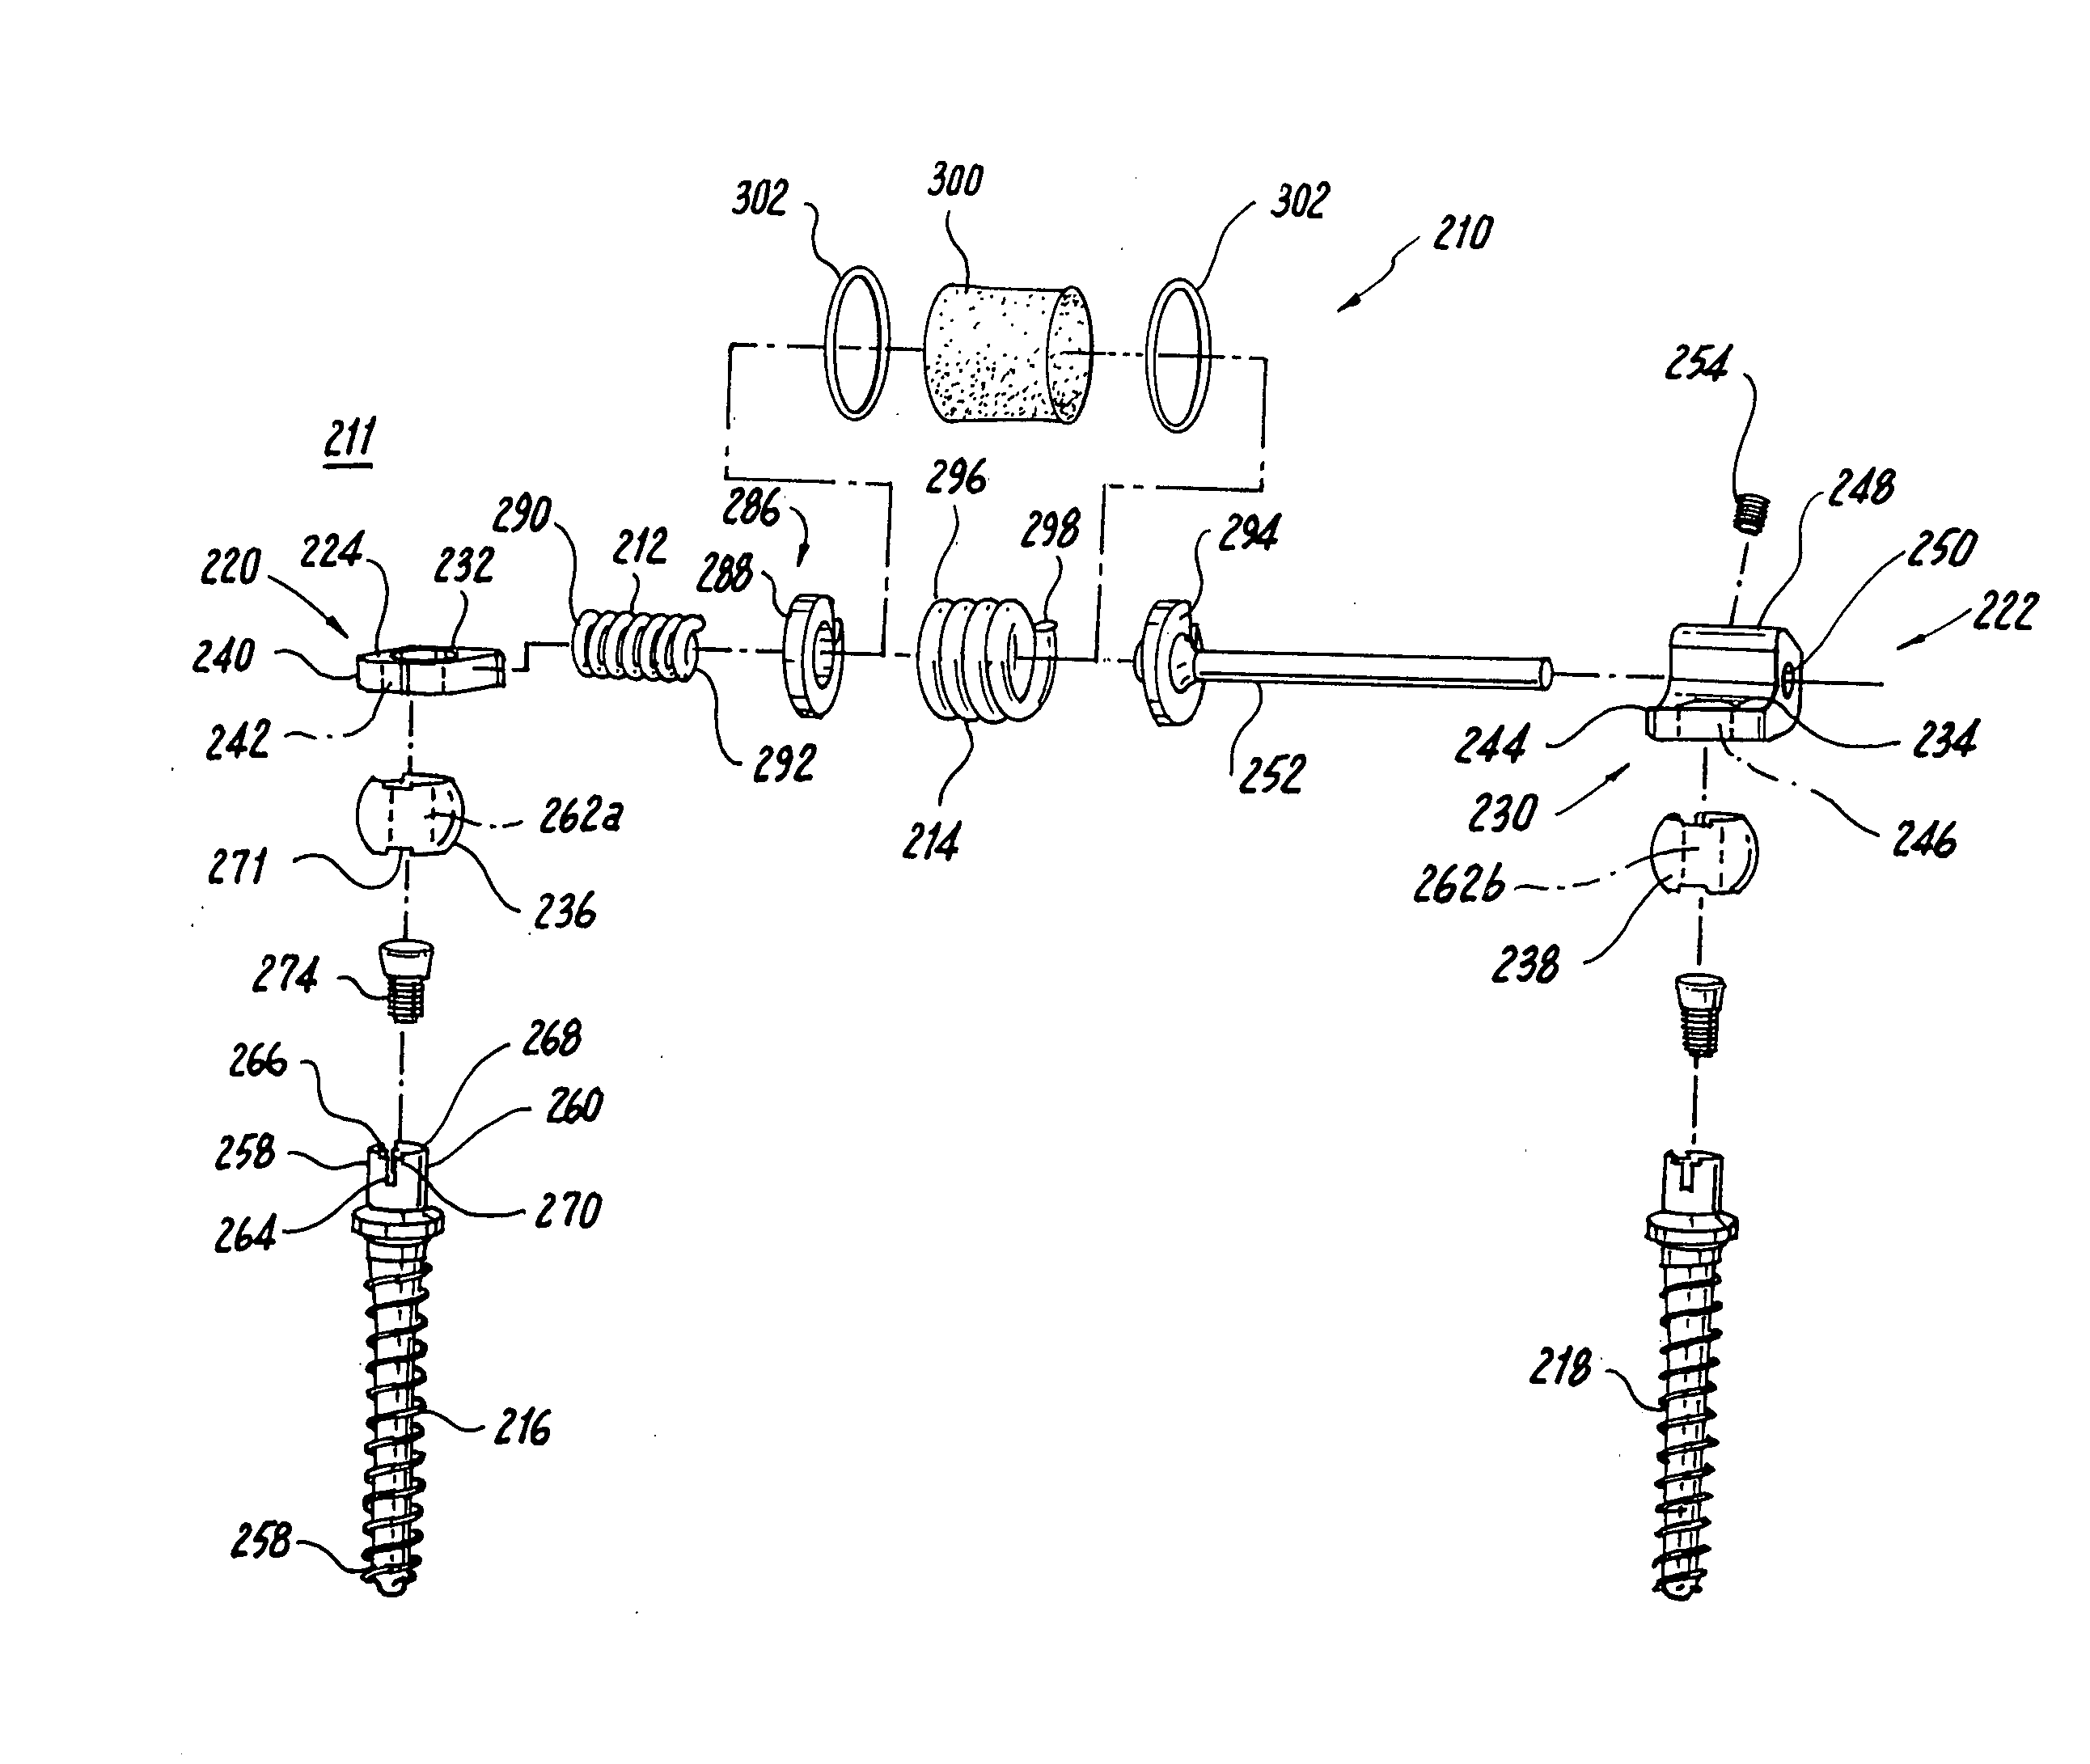 Systems and methods for spine stabilization including a dynamic junction